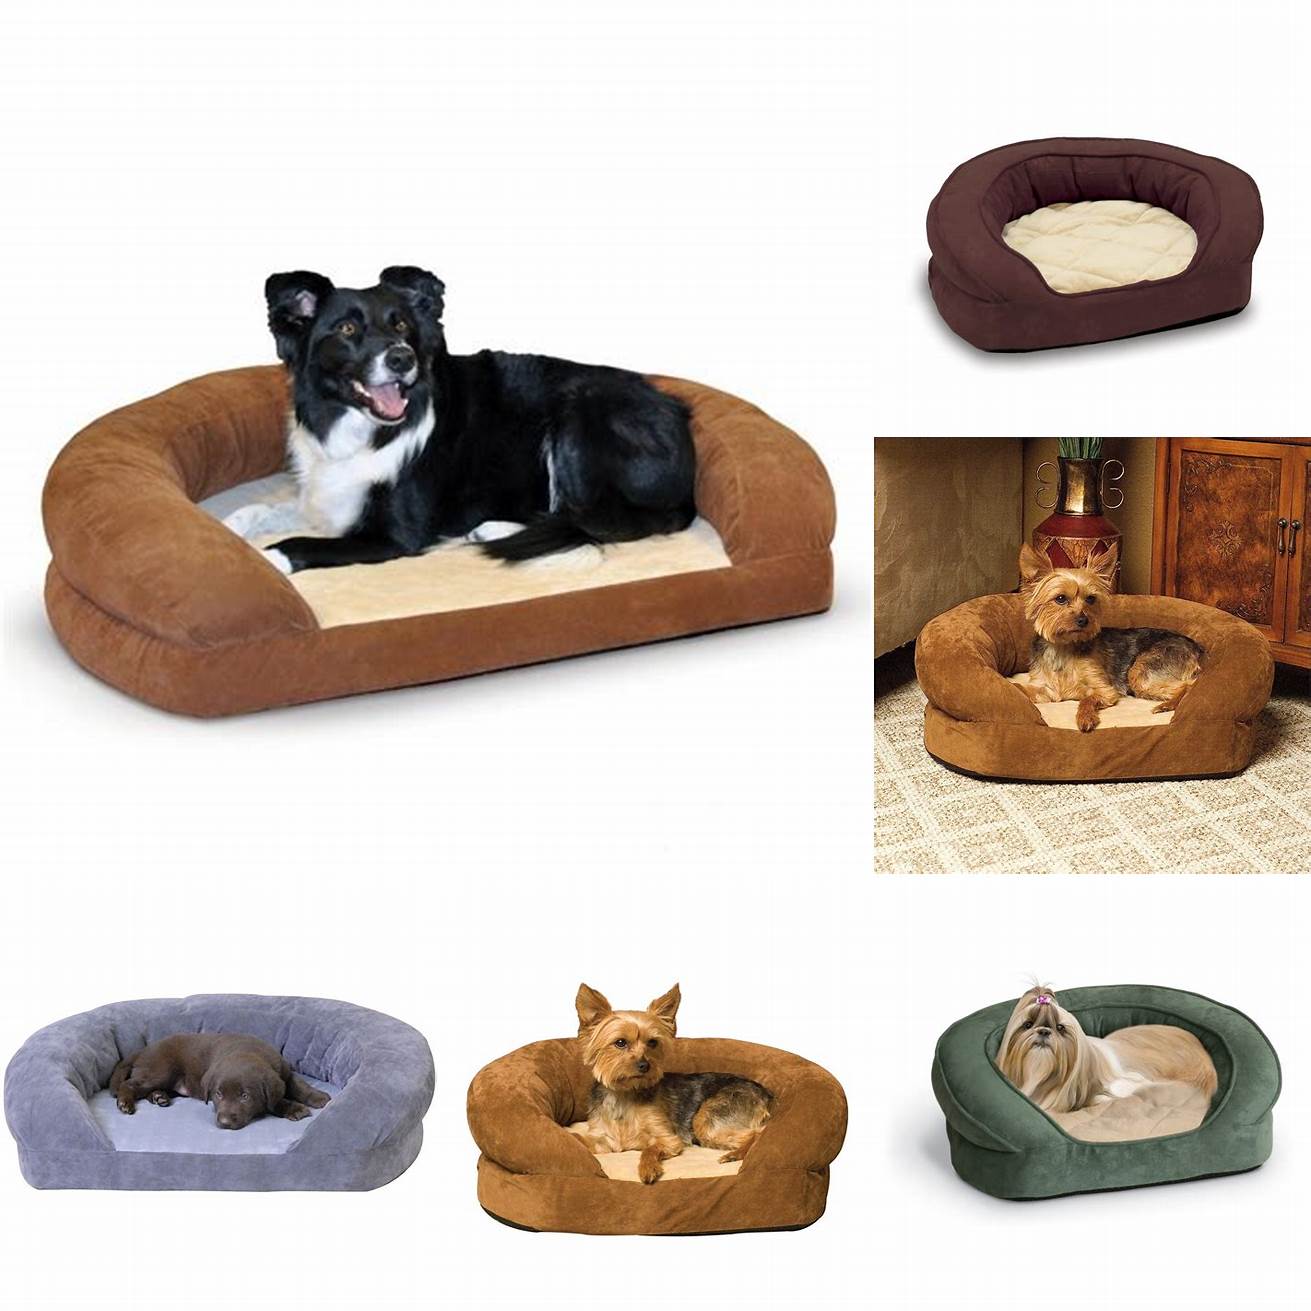 The KH Pet Products Ortho Bolster Sleeper is another great option for dogs with joint pain or arthritis